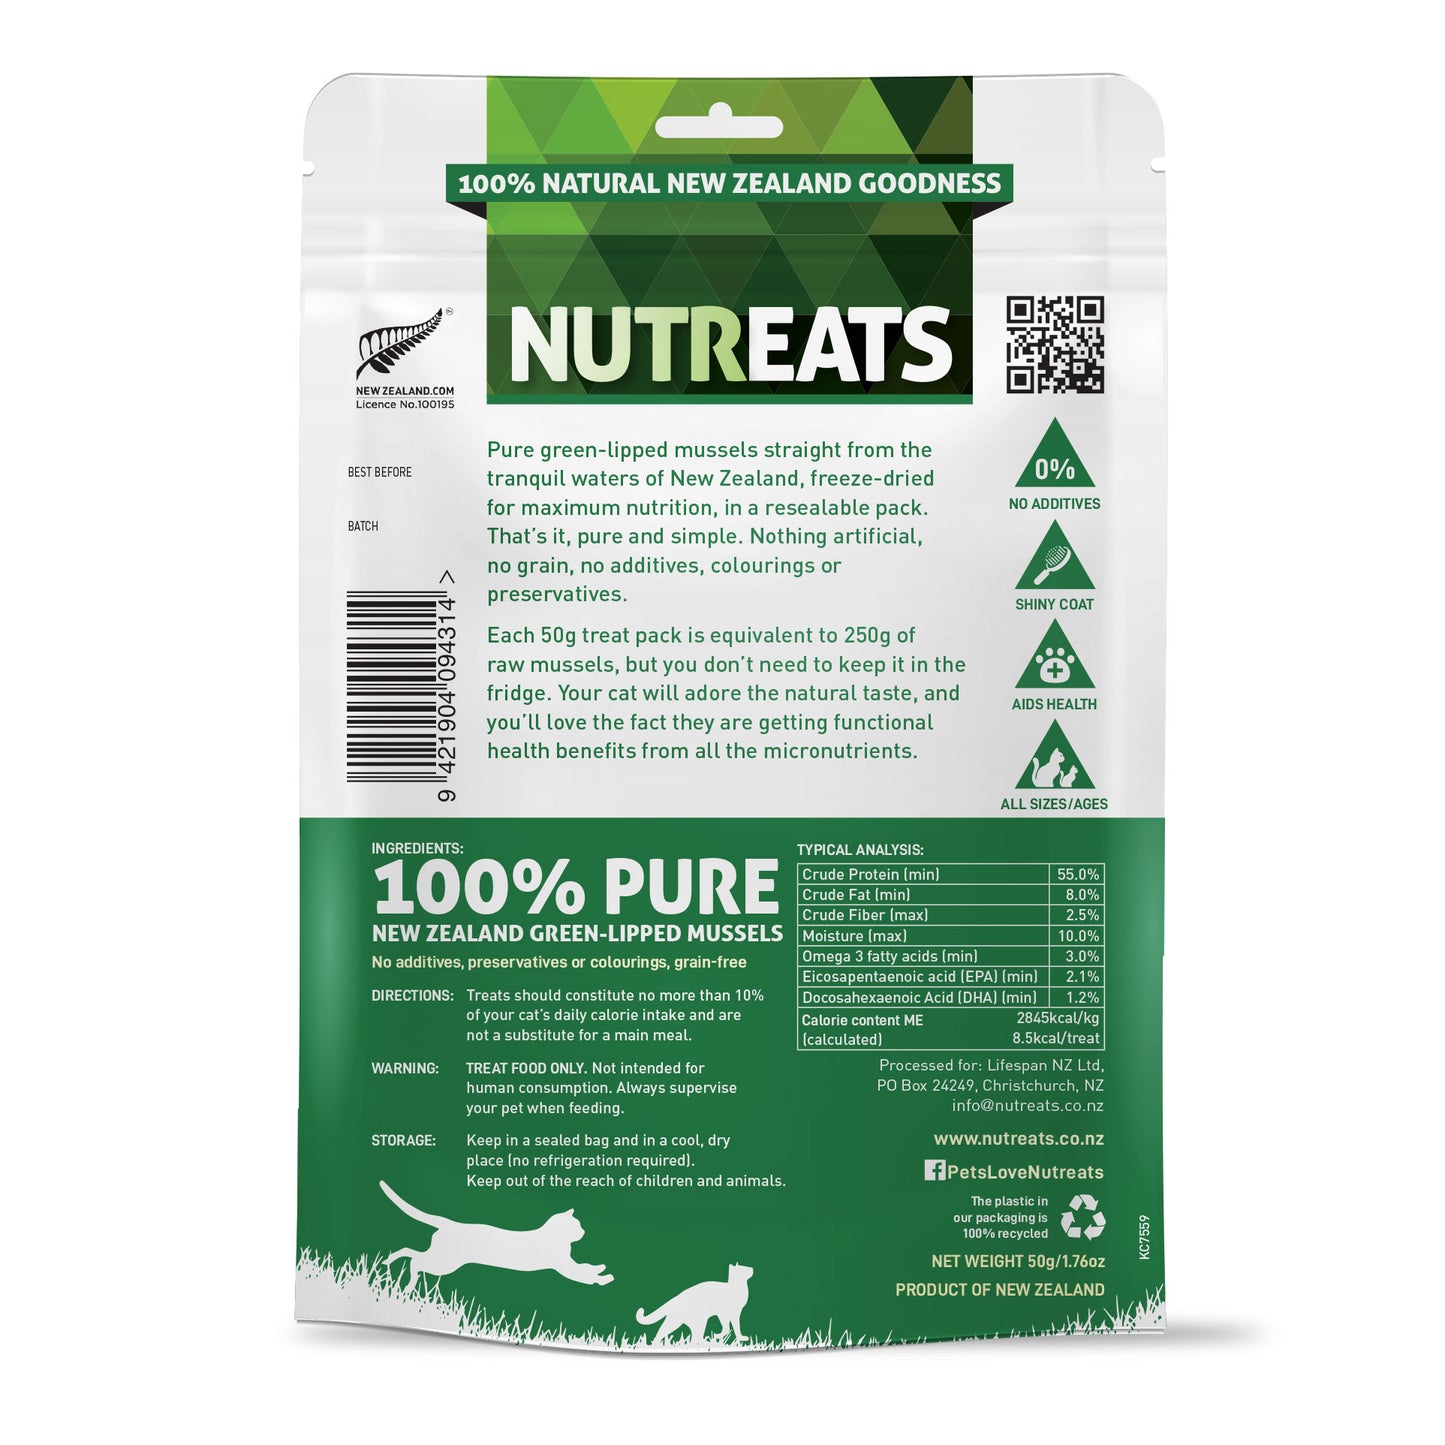 New Zealand Green-lipped mussels. Freeze-dried and 100% natural. Great for supporting healthy joints, ski and glossy coat and may help support immunity. Natural Omega-3 functional treats. 100% natural cat treats that are delicious.